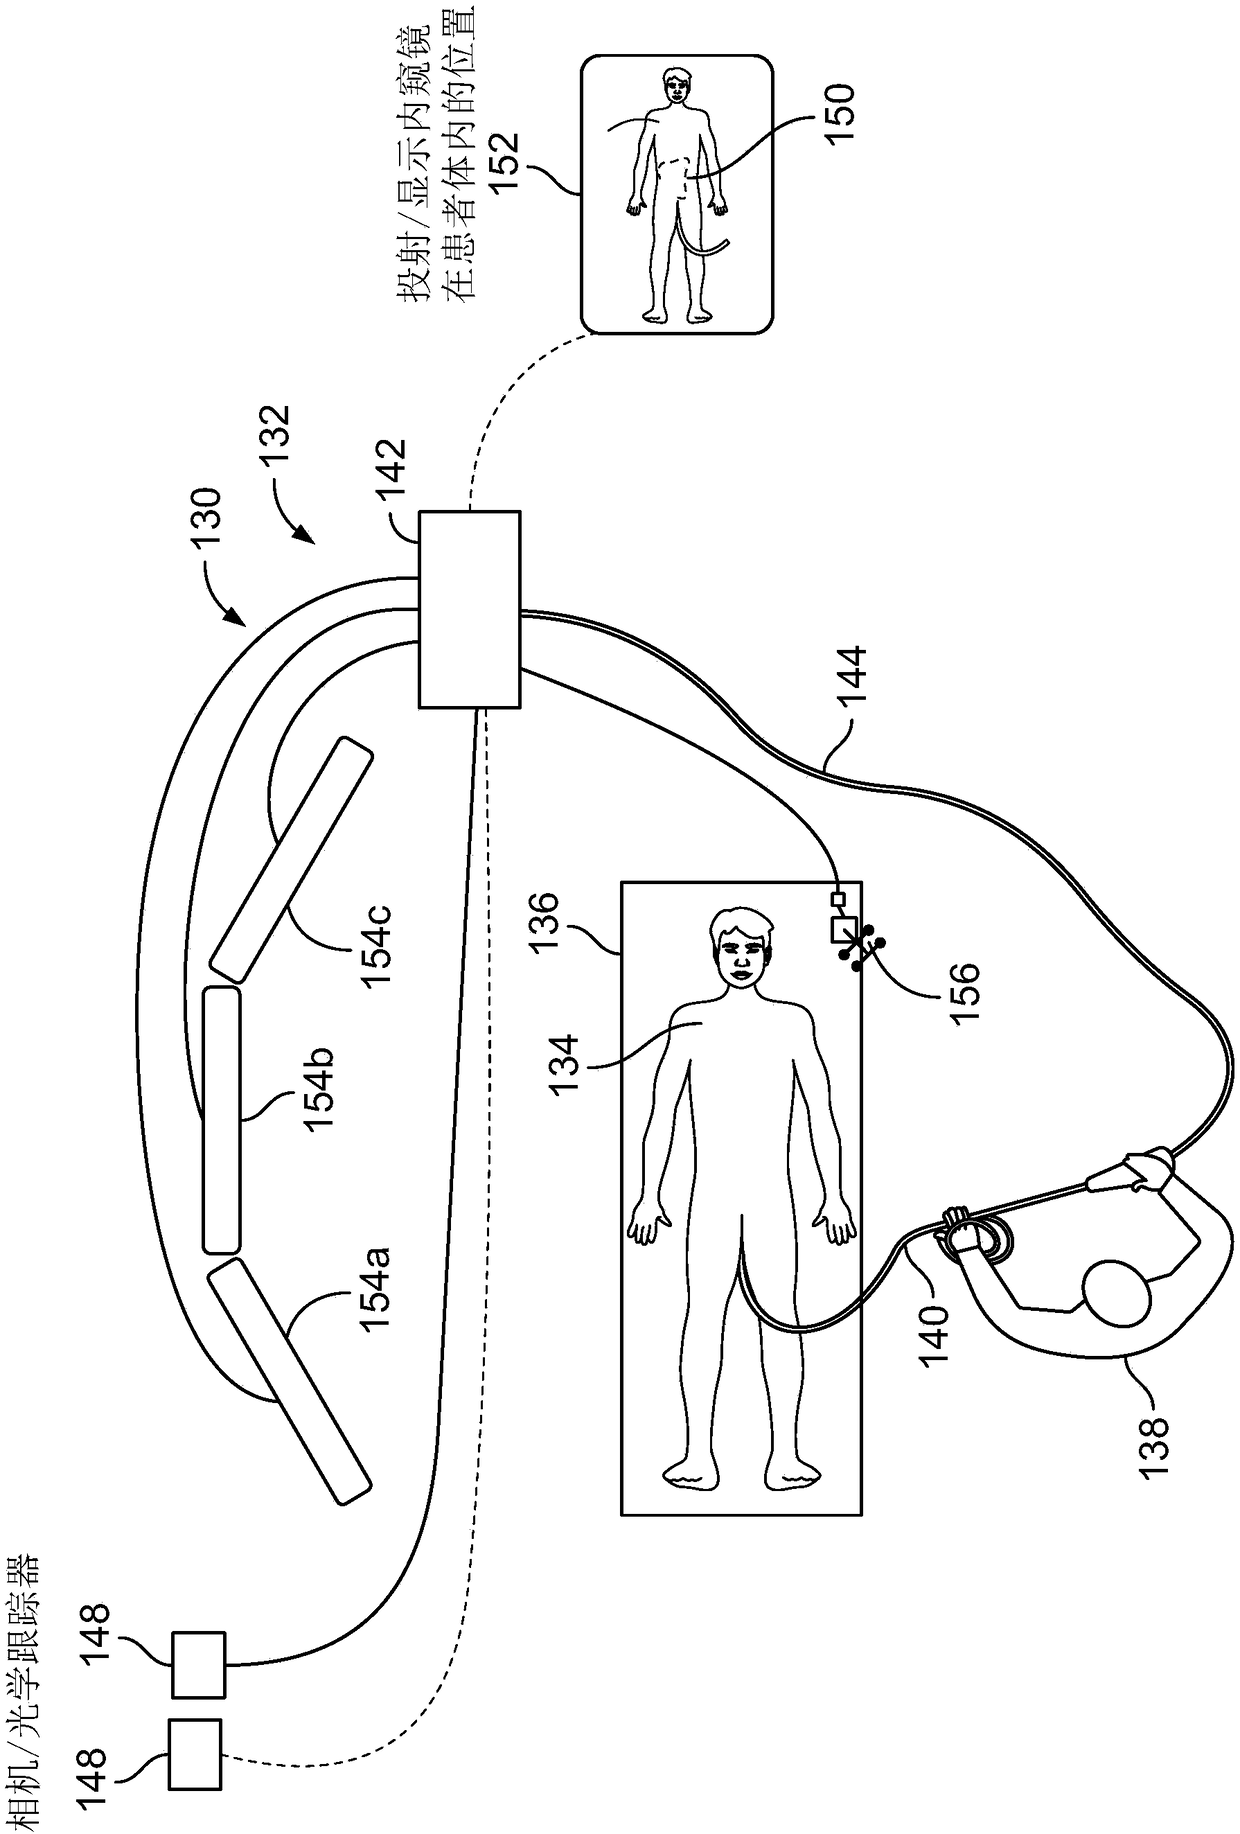 Device and method for tracking the position of an endoscope within a patient's body